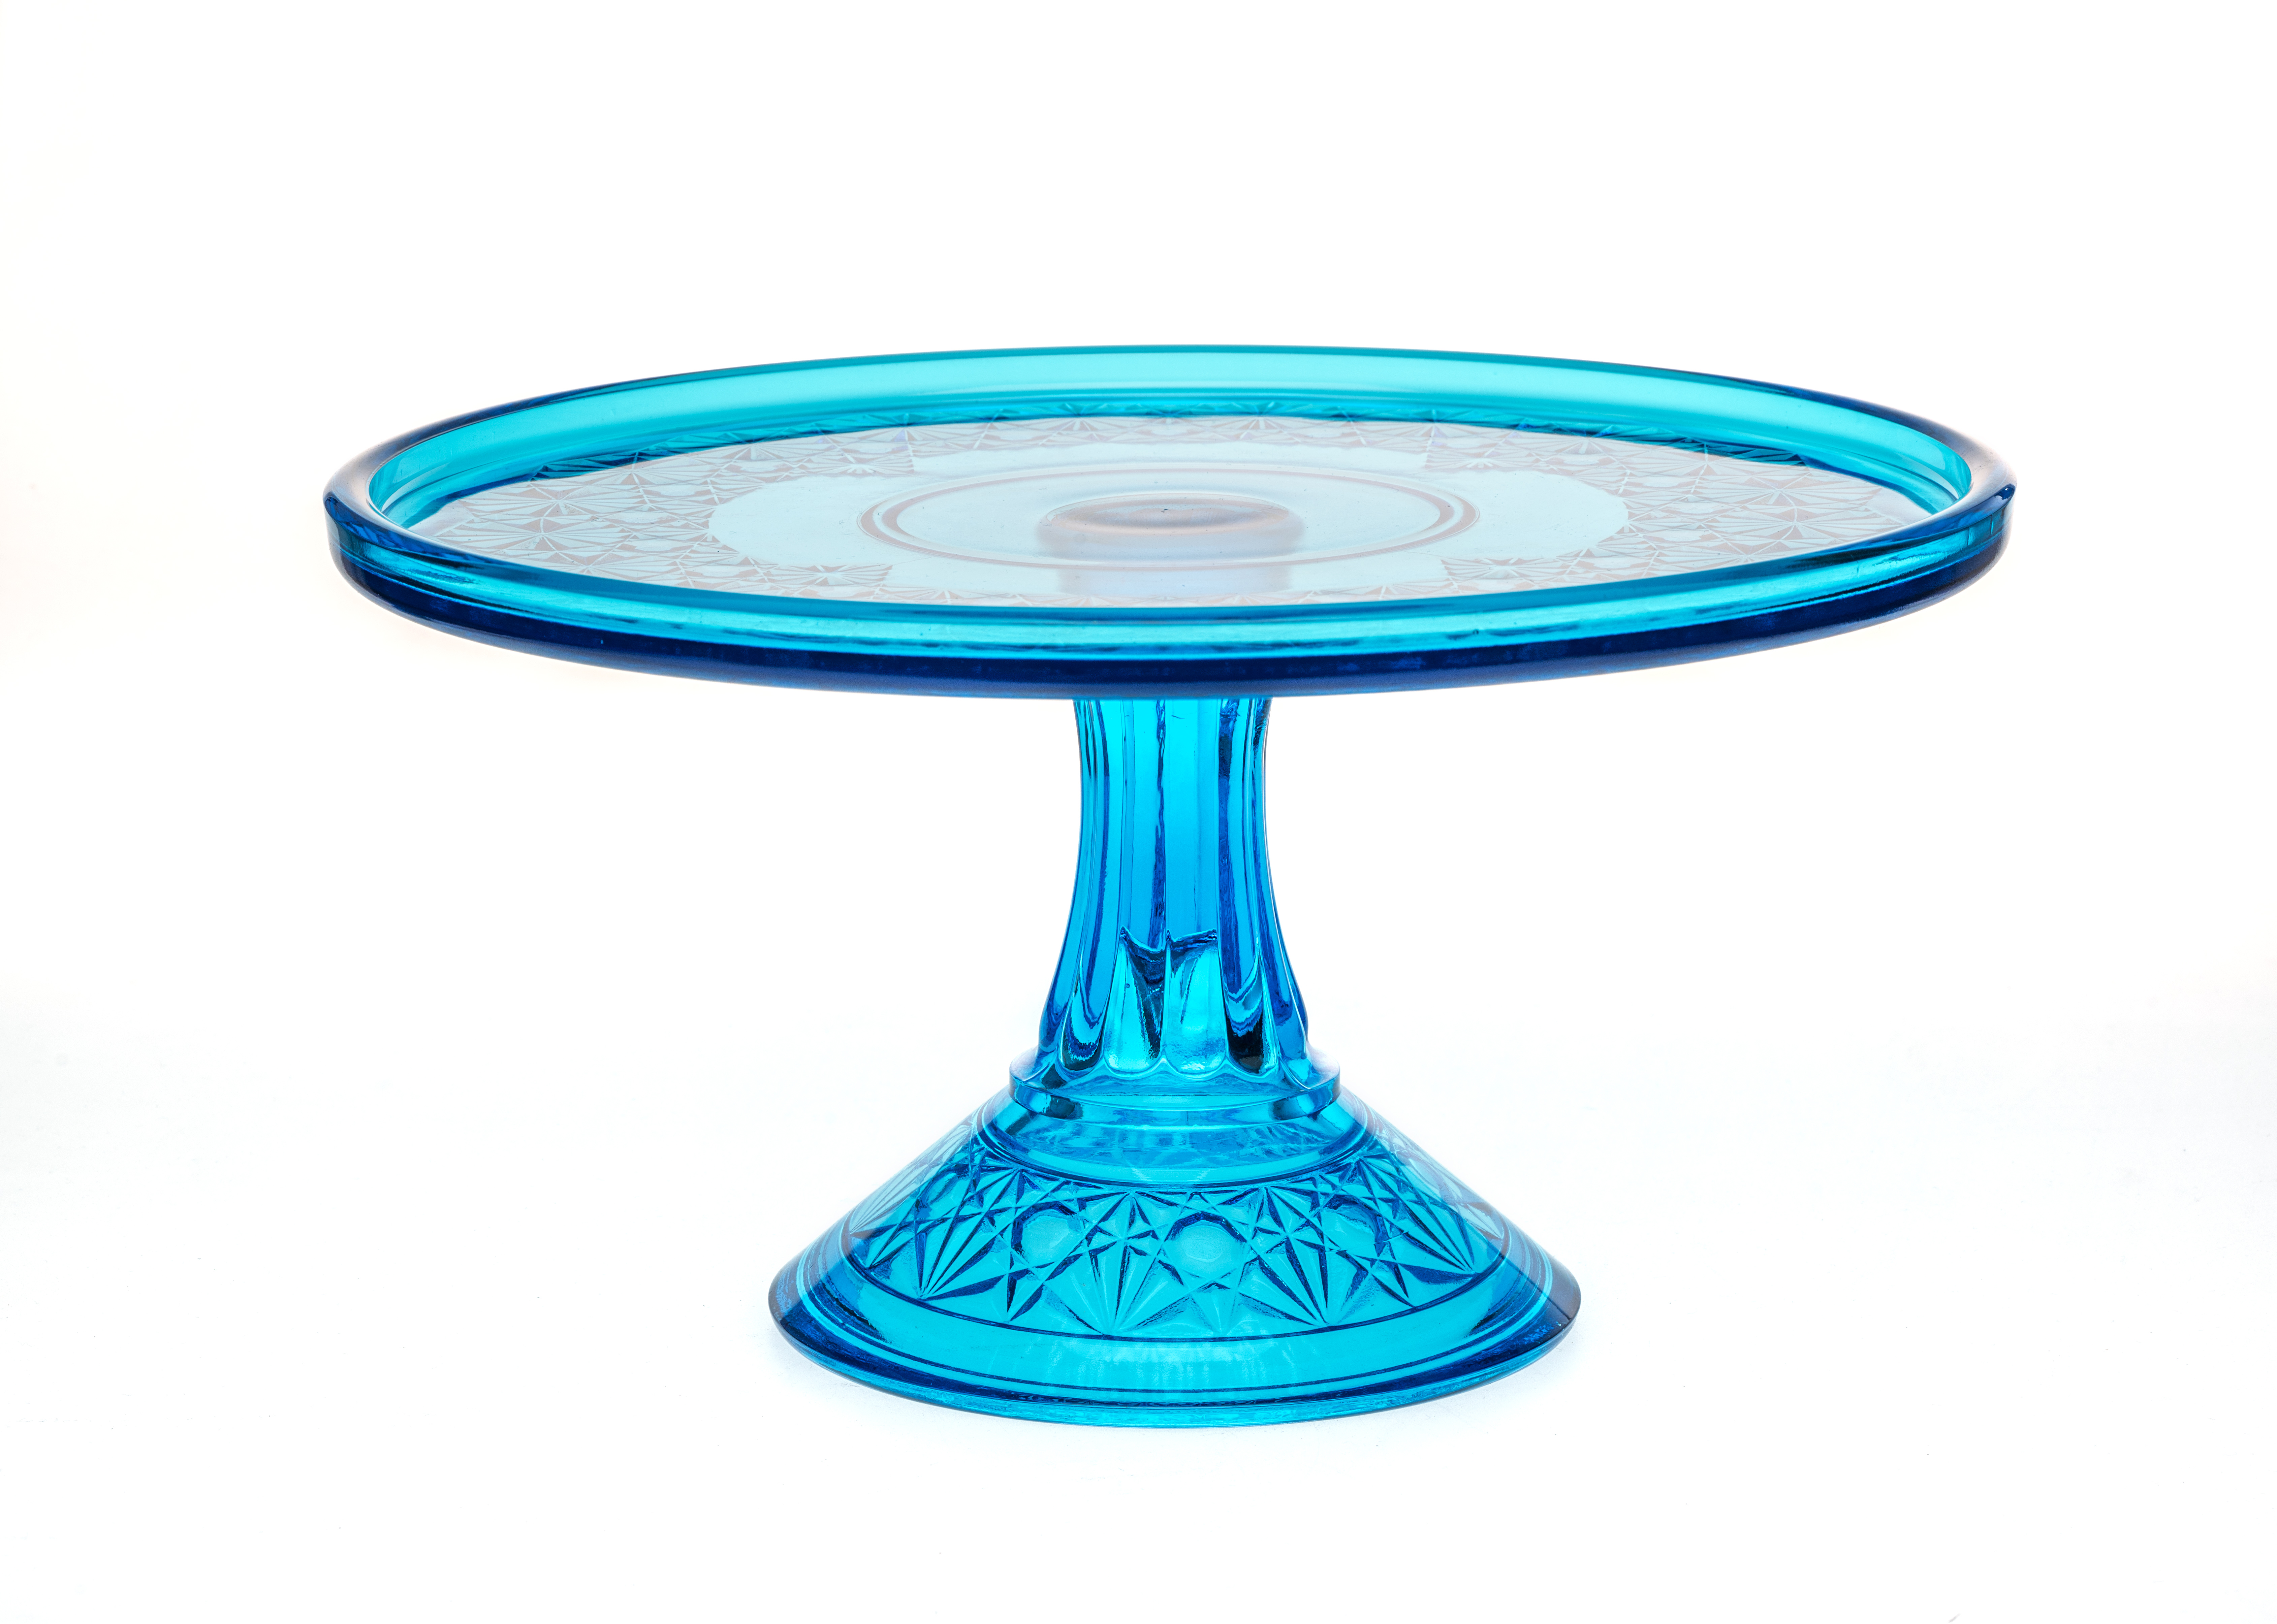 Cake Plates Archives - Mosser Glass